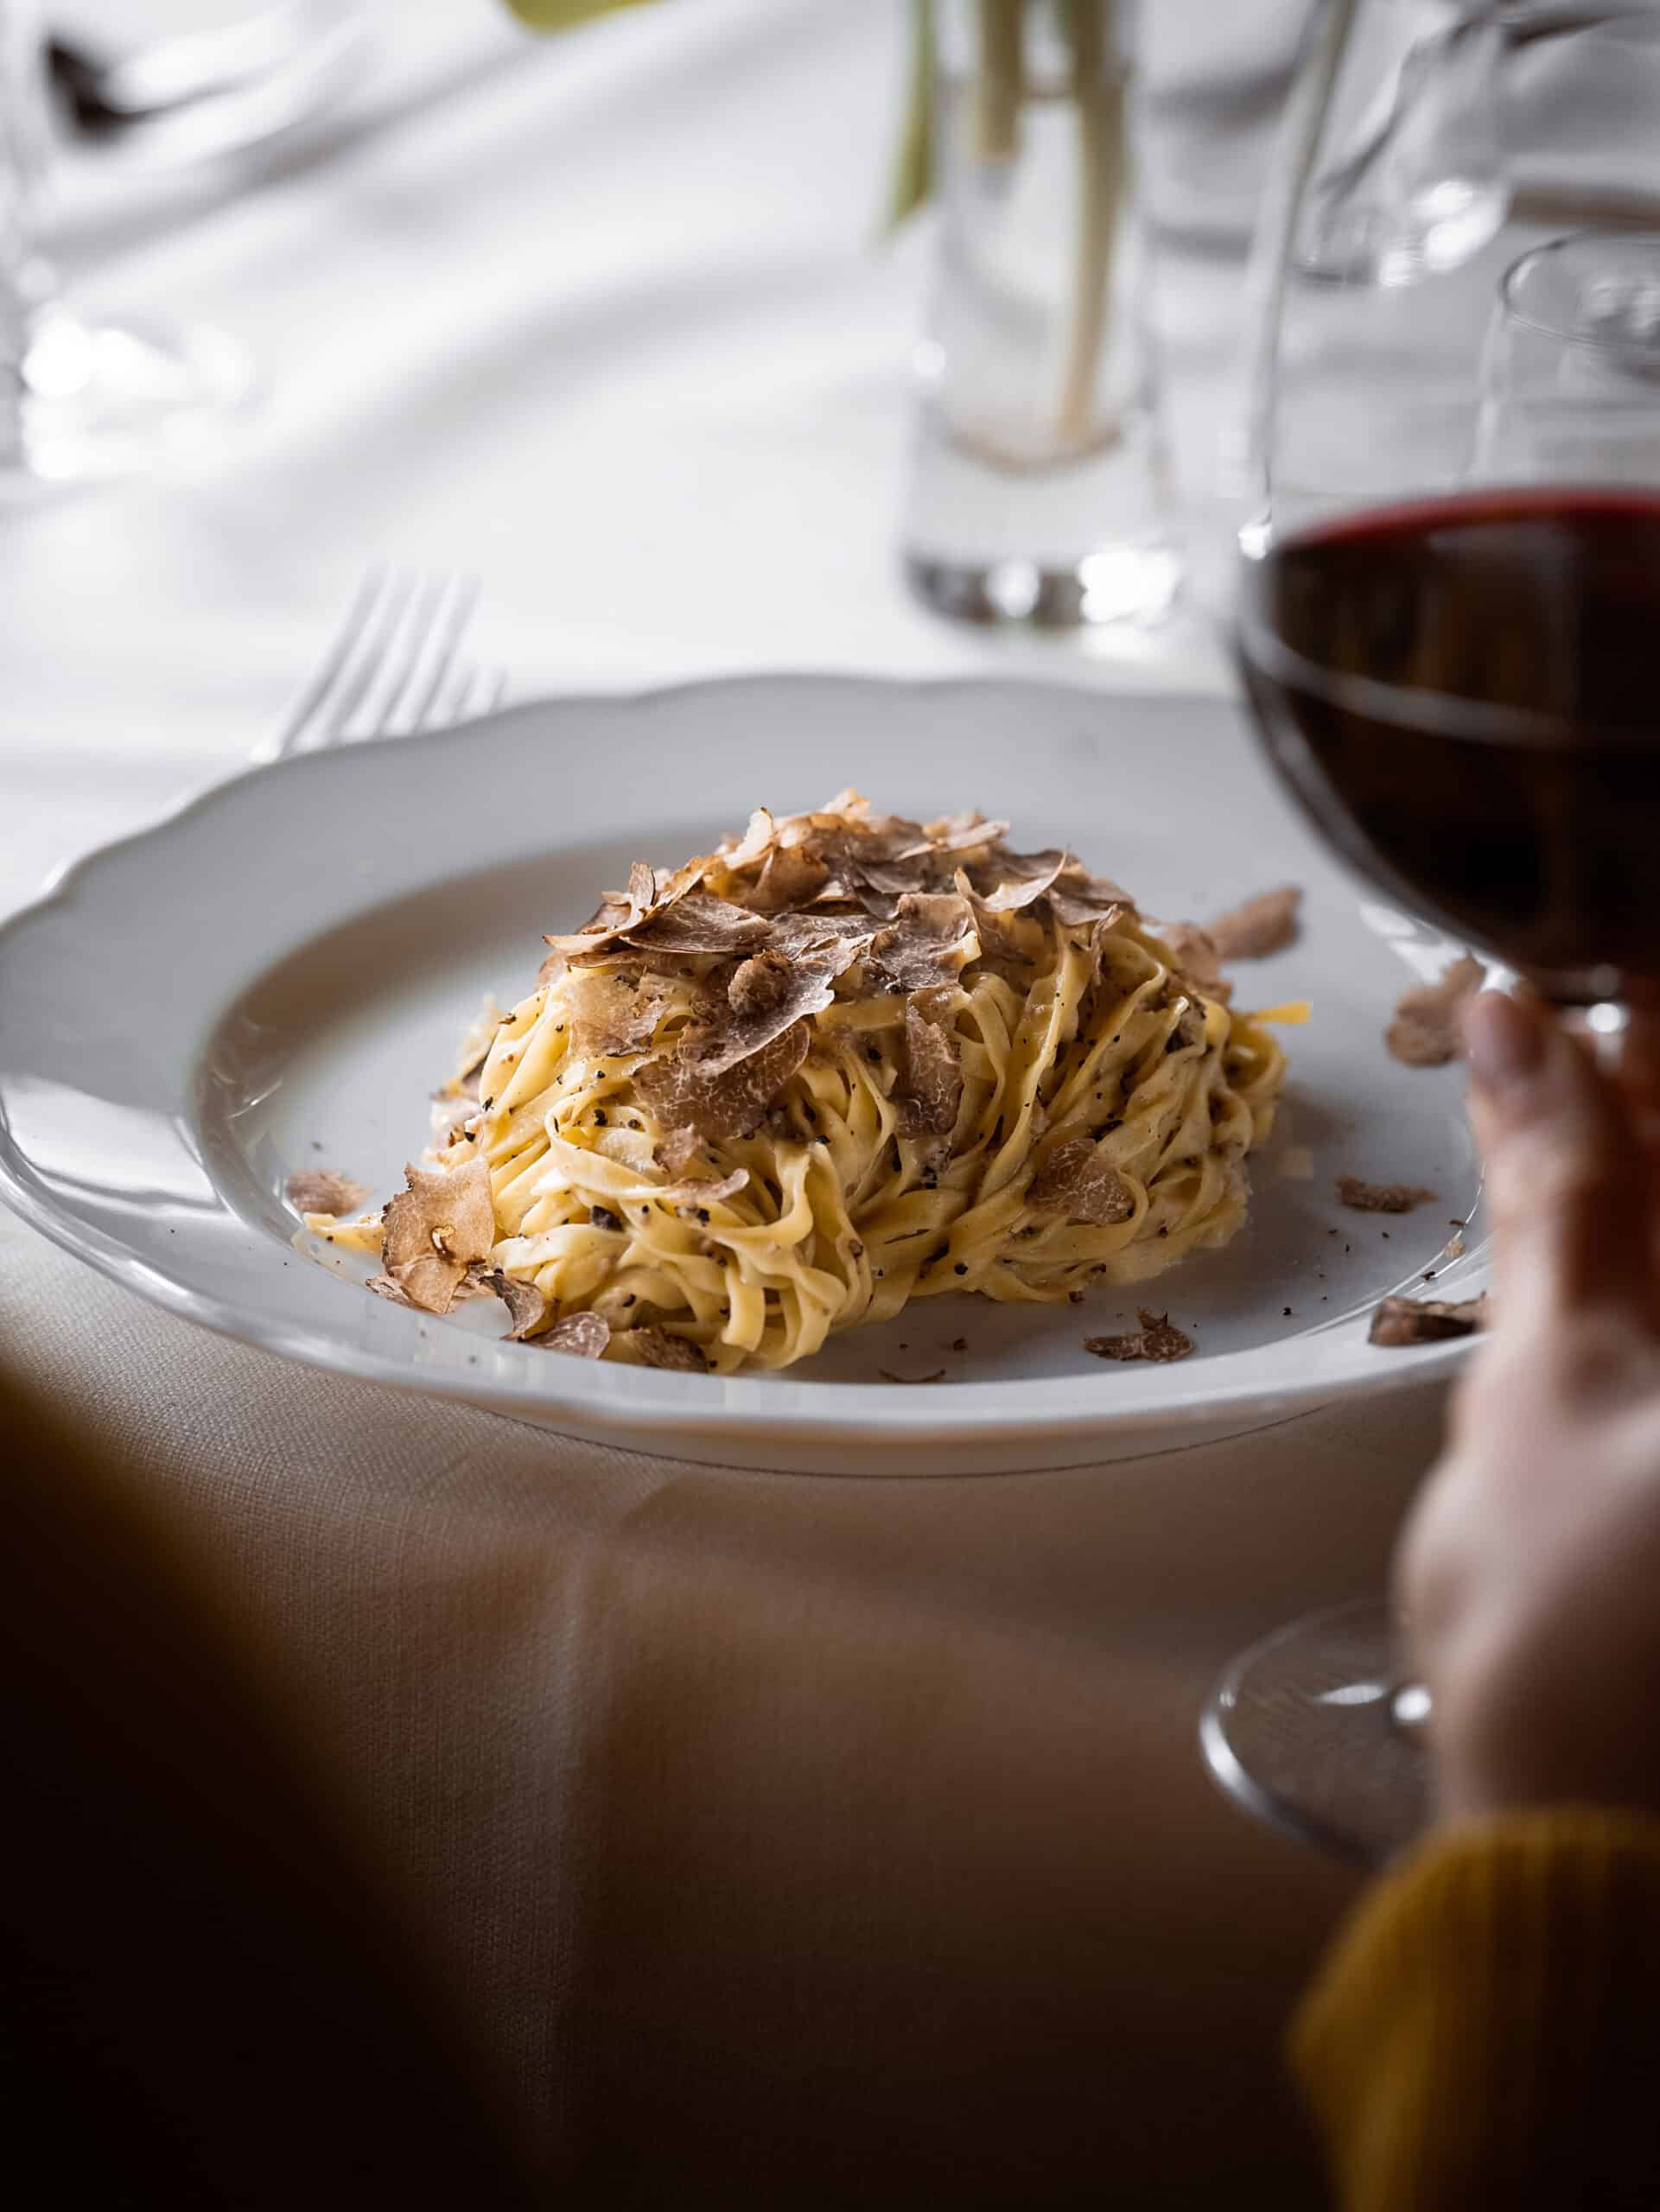 which are tuscany culinary traditions?